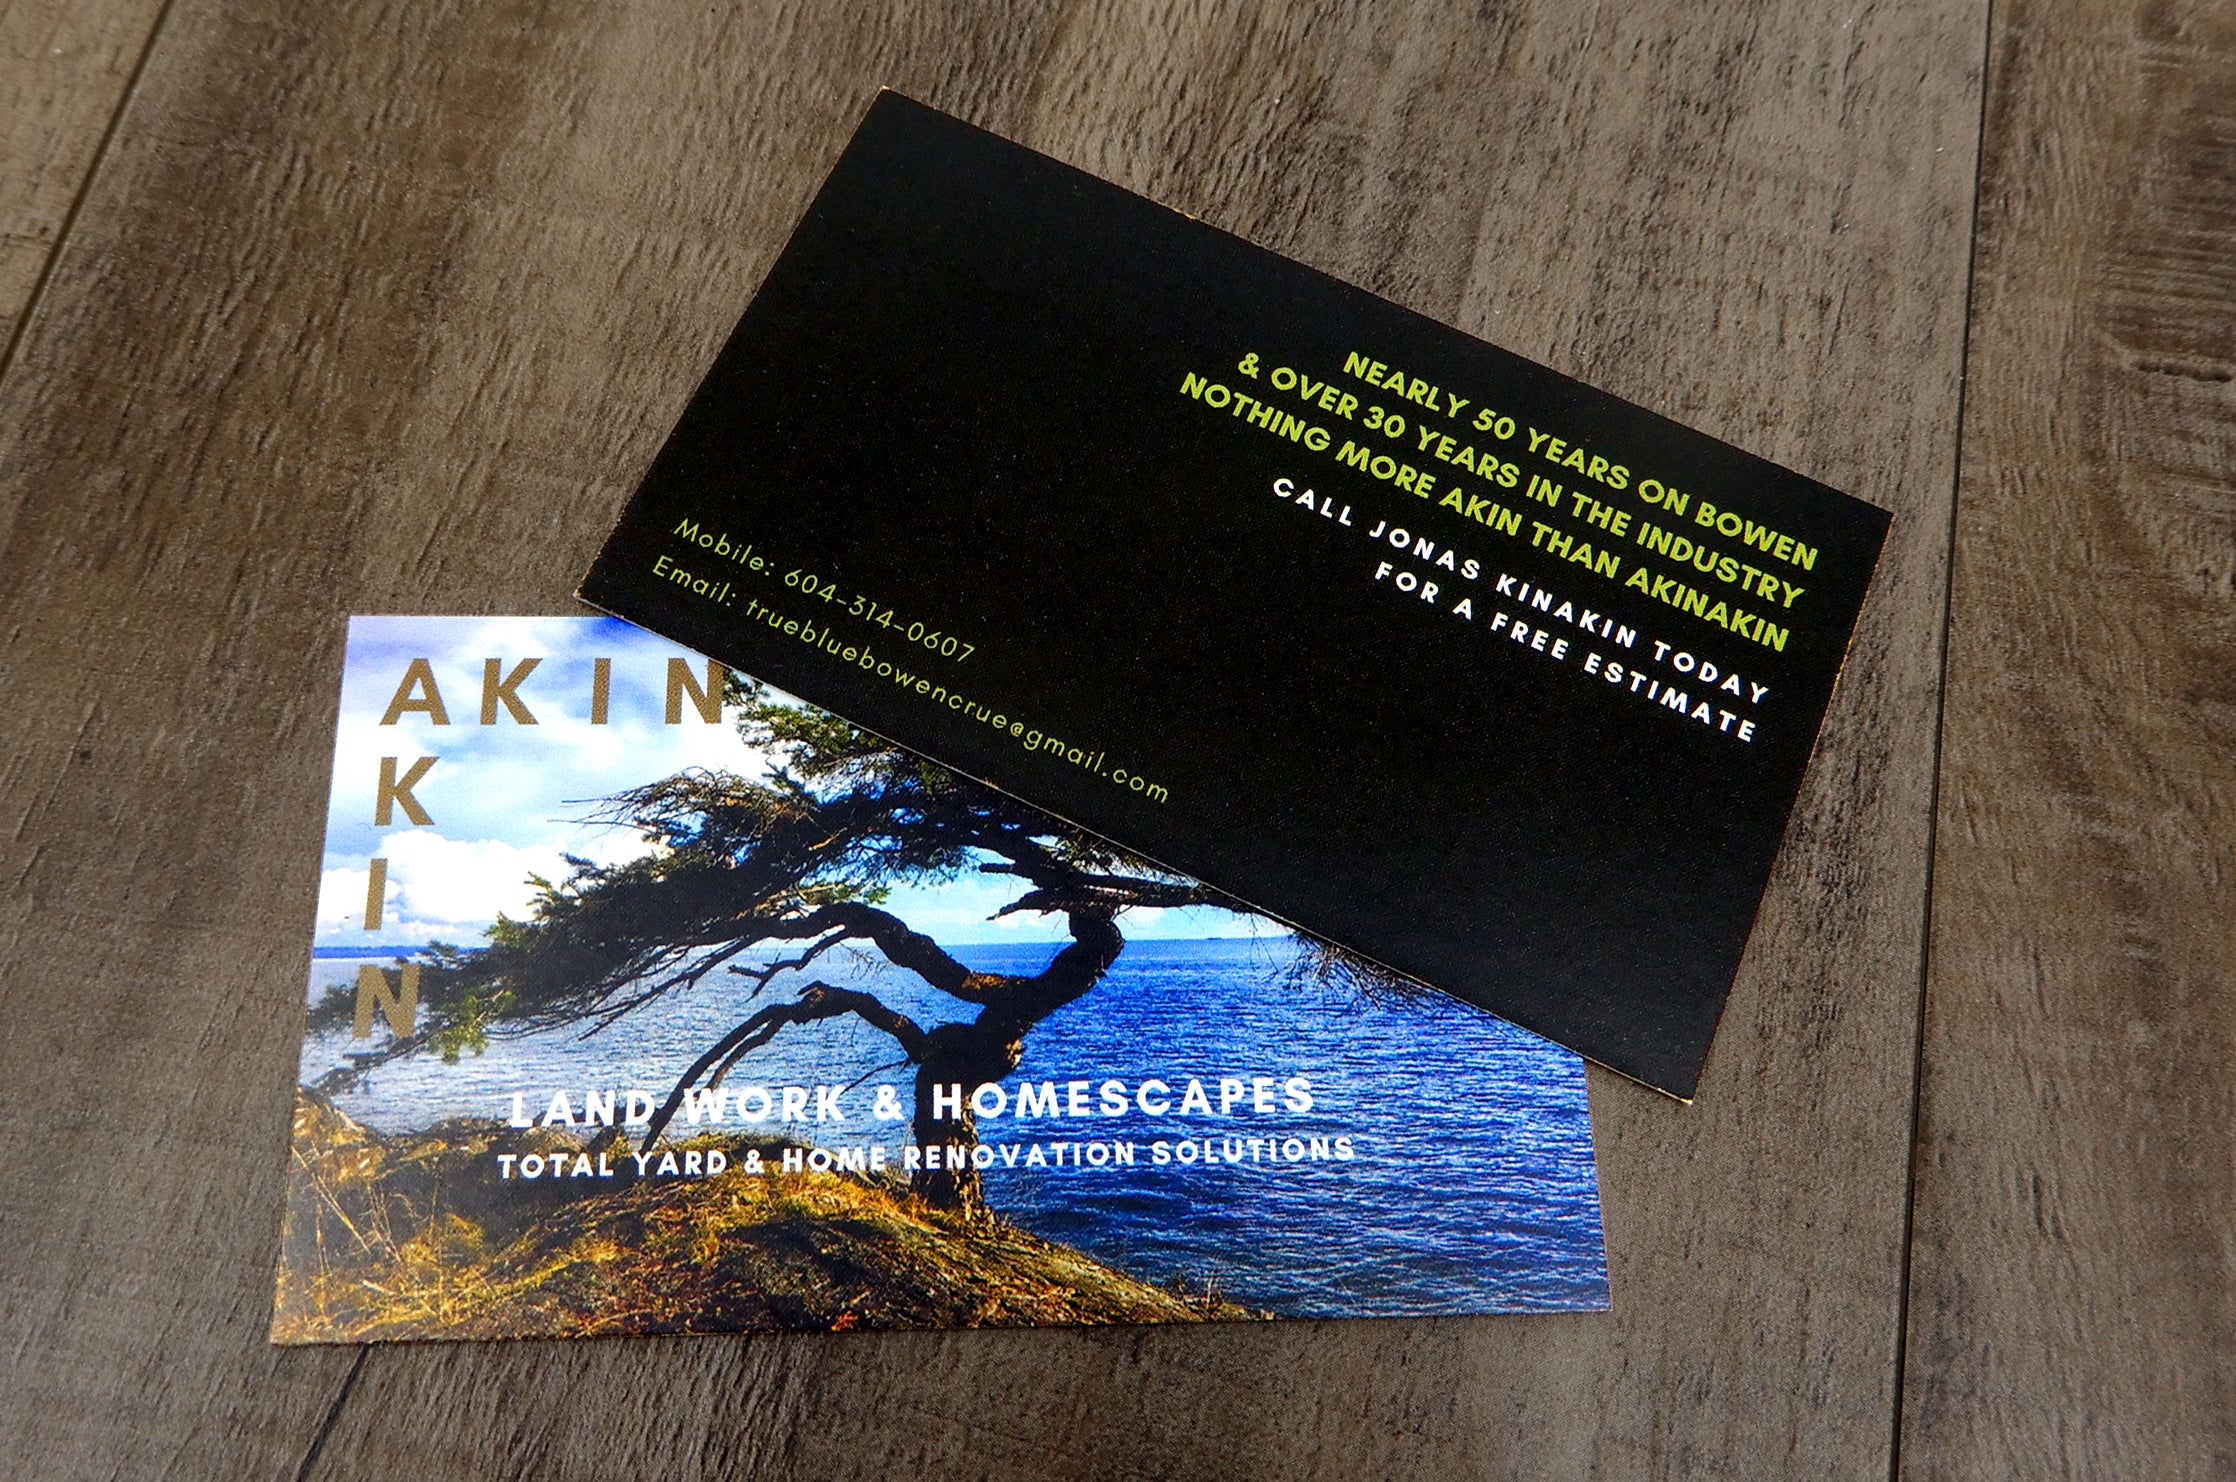 14pt Coated Business Cards for Akin Land work and Homescapes | Front has a photo of a tree on a cliff by water | Back has contact information | Clubcard Printing USA